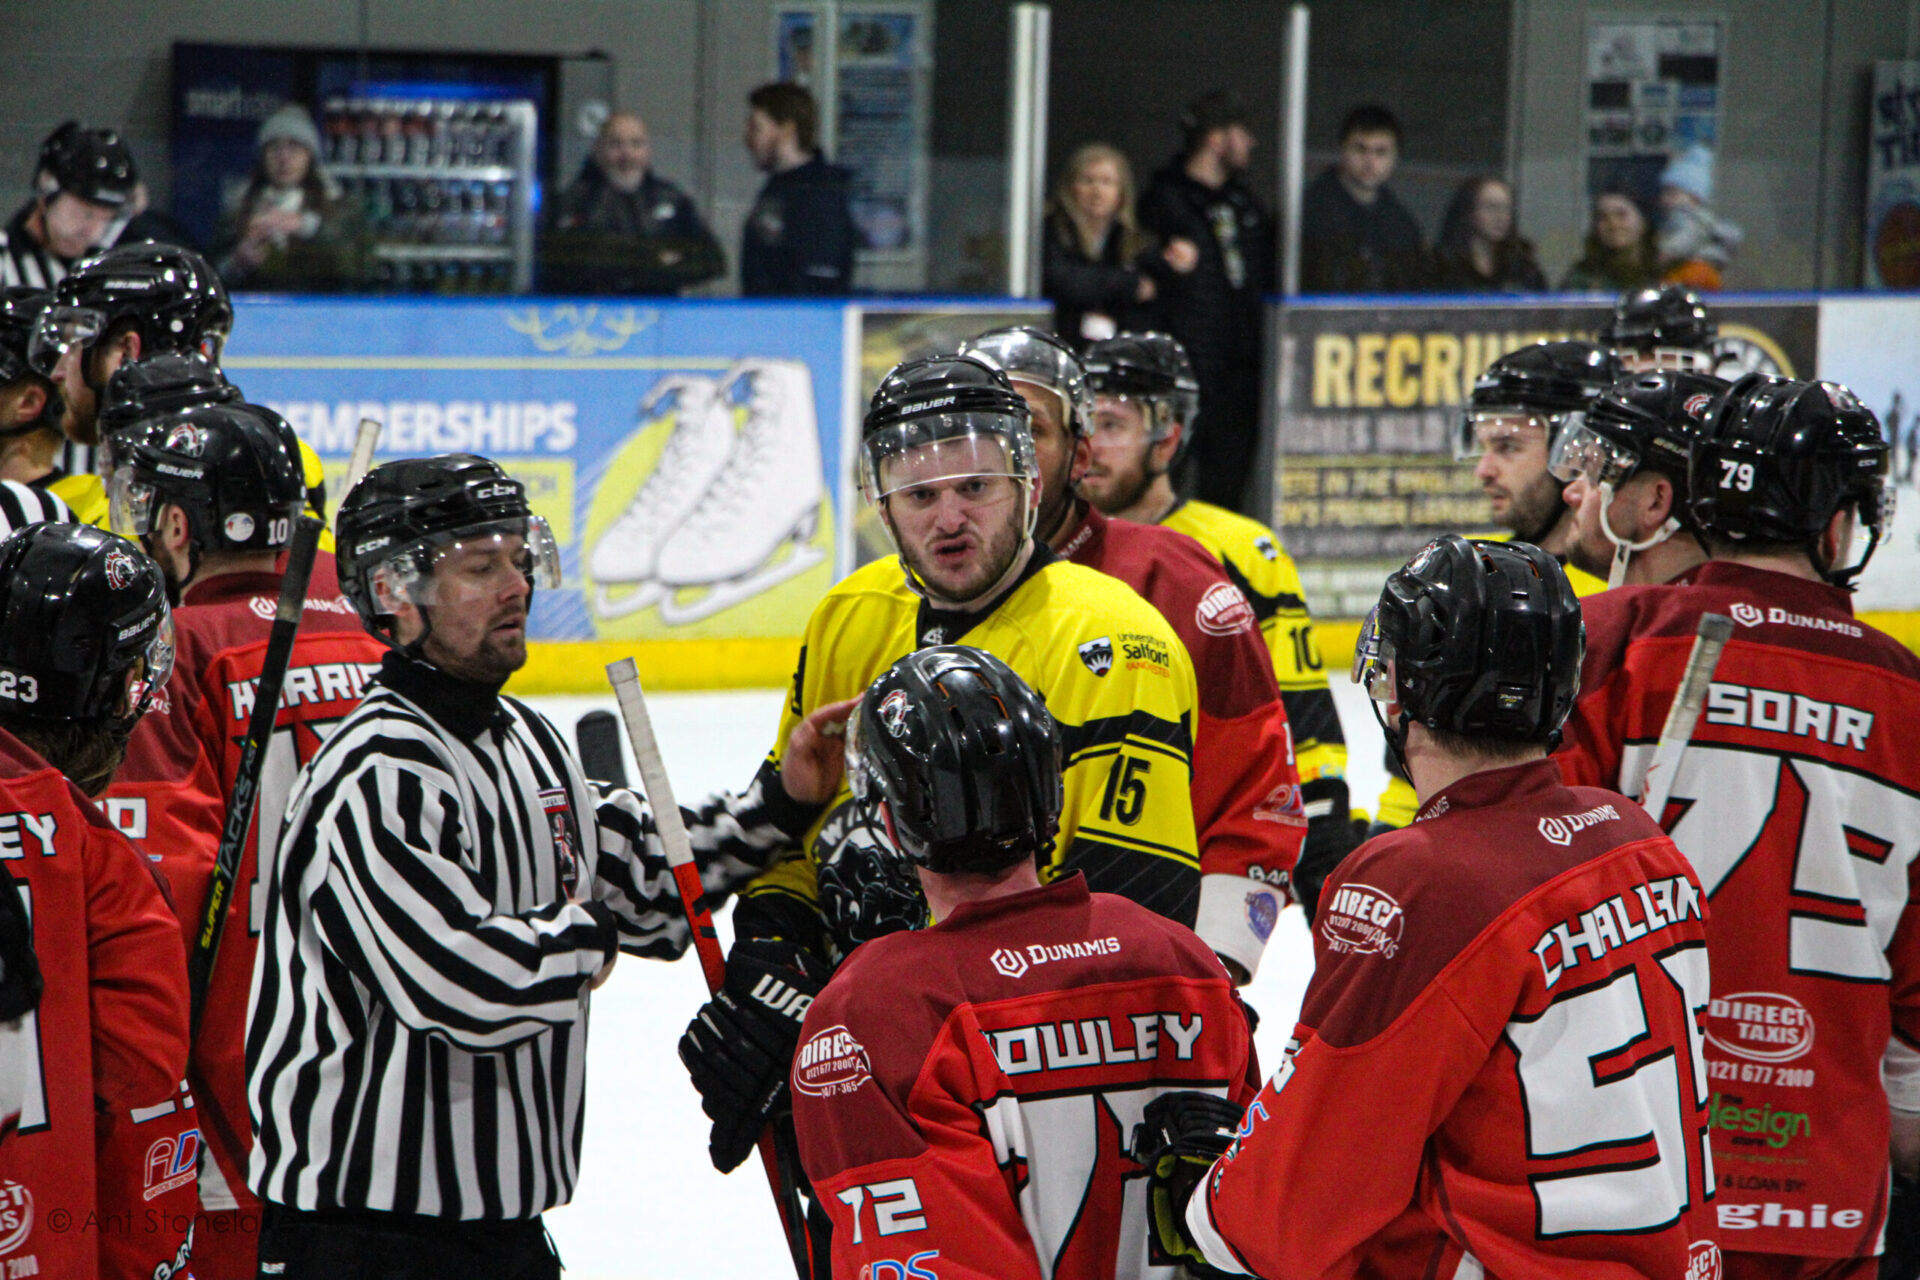 Fights break out at the final whistle | Widnes Wild 2-7 Solihull Barons